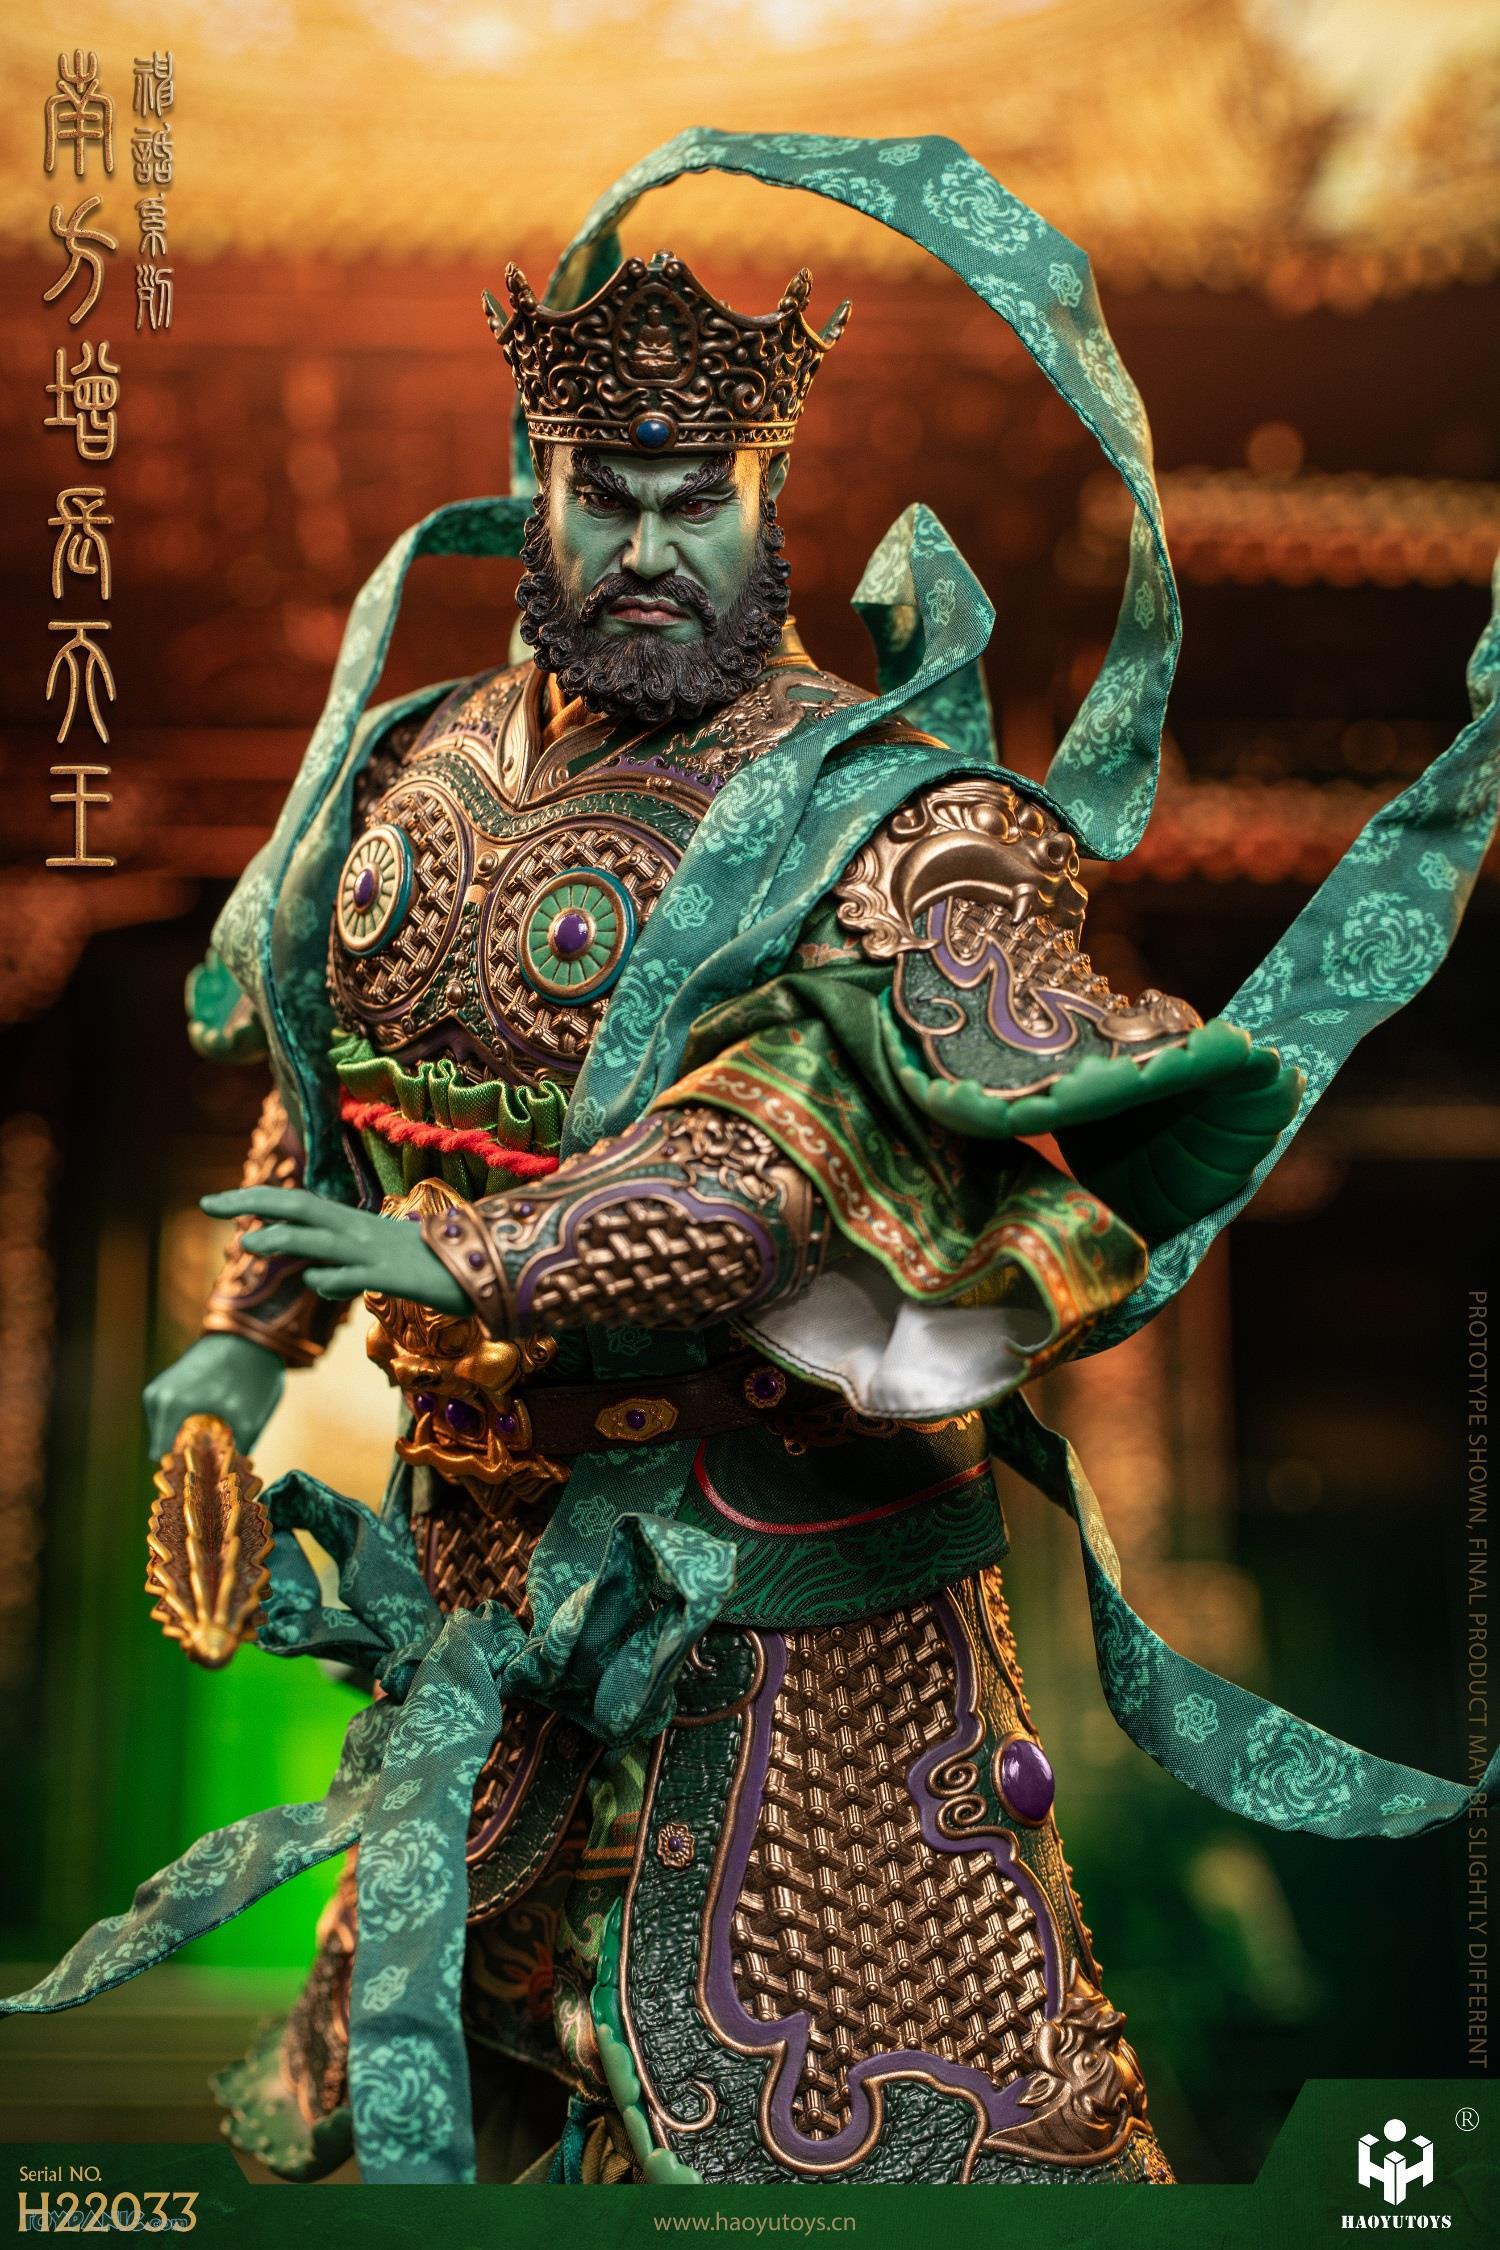 mythseries - NEW PRODUCT: HaoYuToys 1/6 Myth Series Southern Growth King 212202451834PM_12195